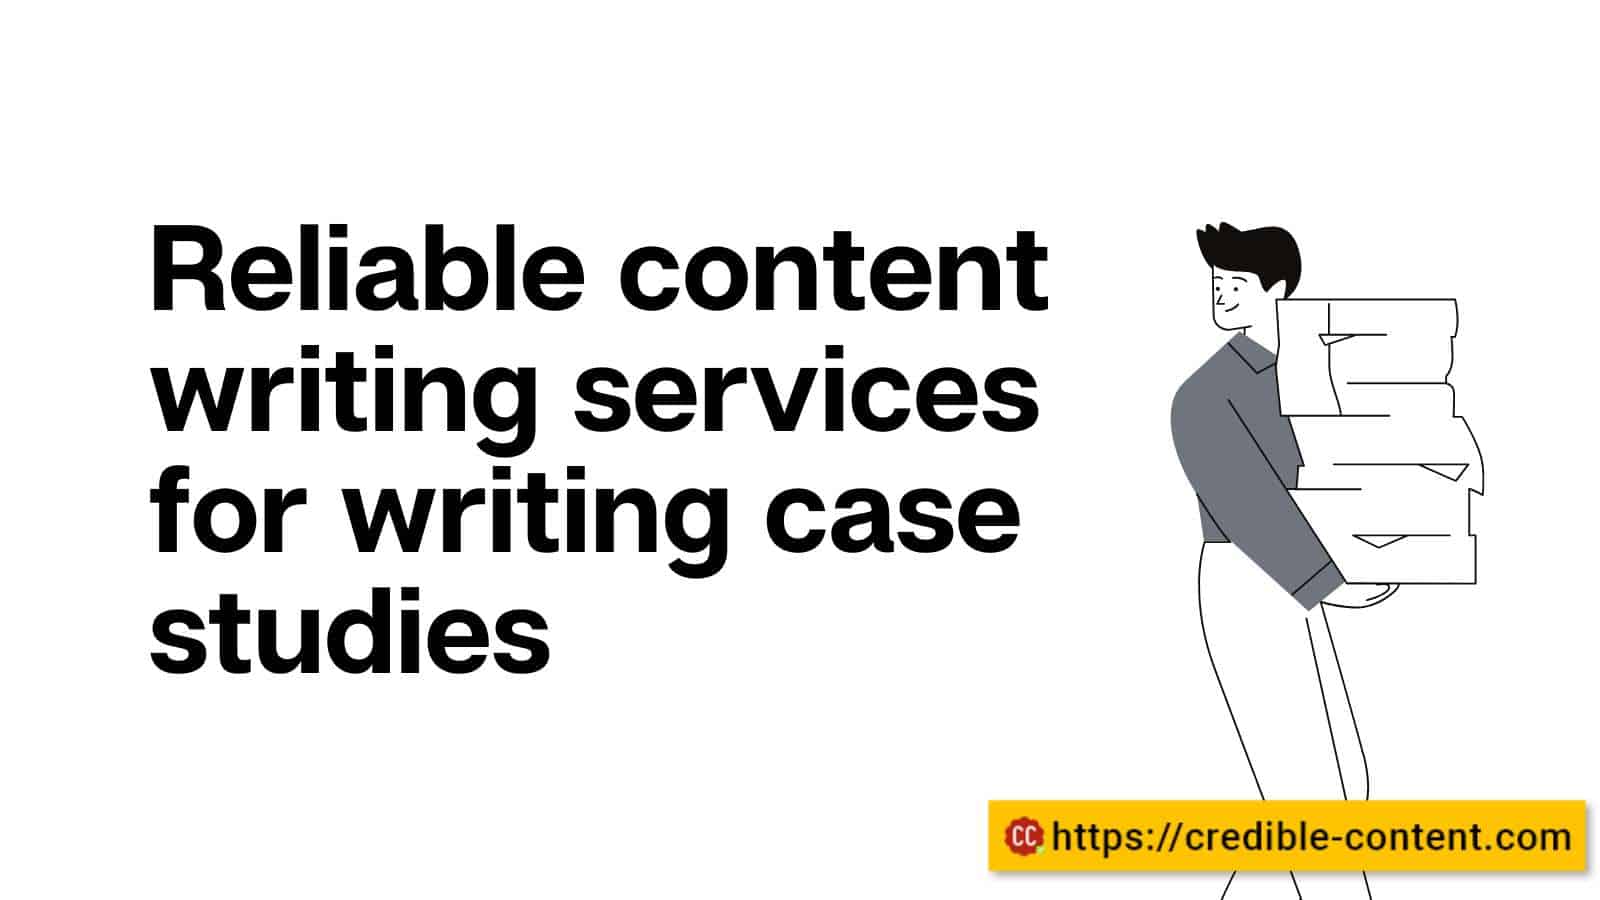 Reliable content writing services for writing case studies